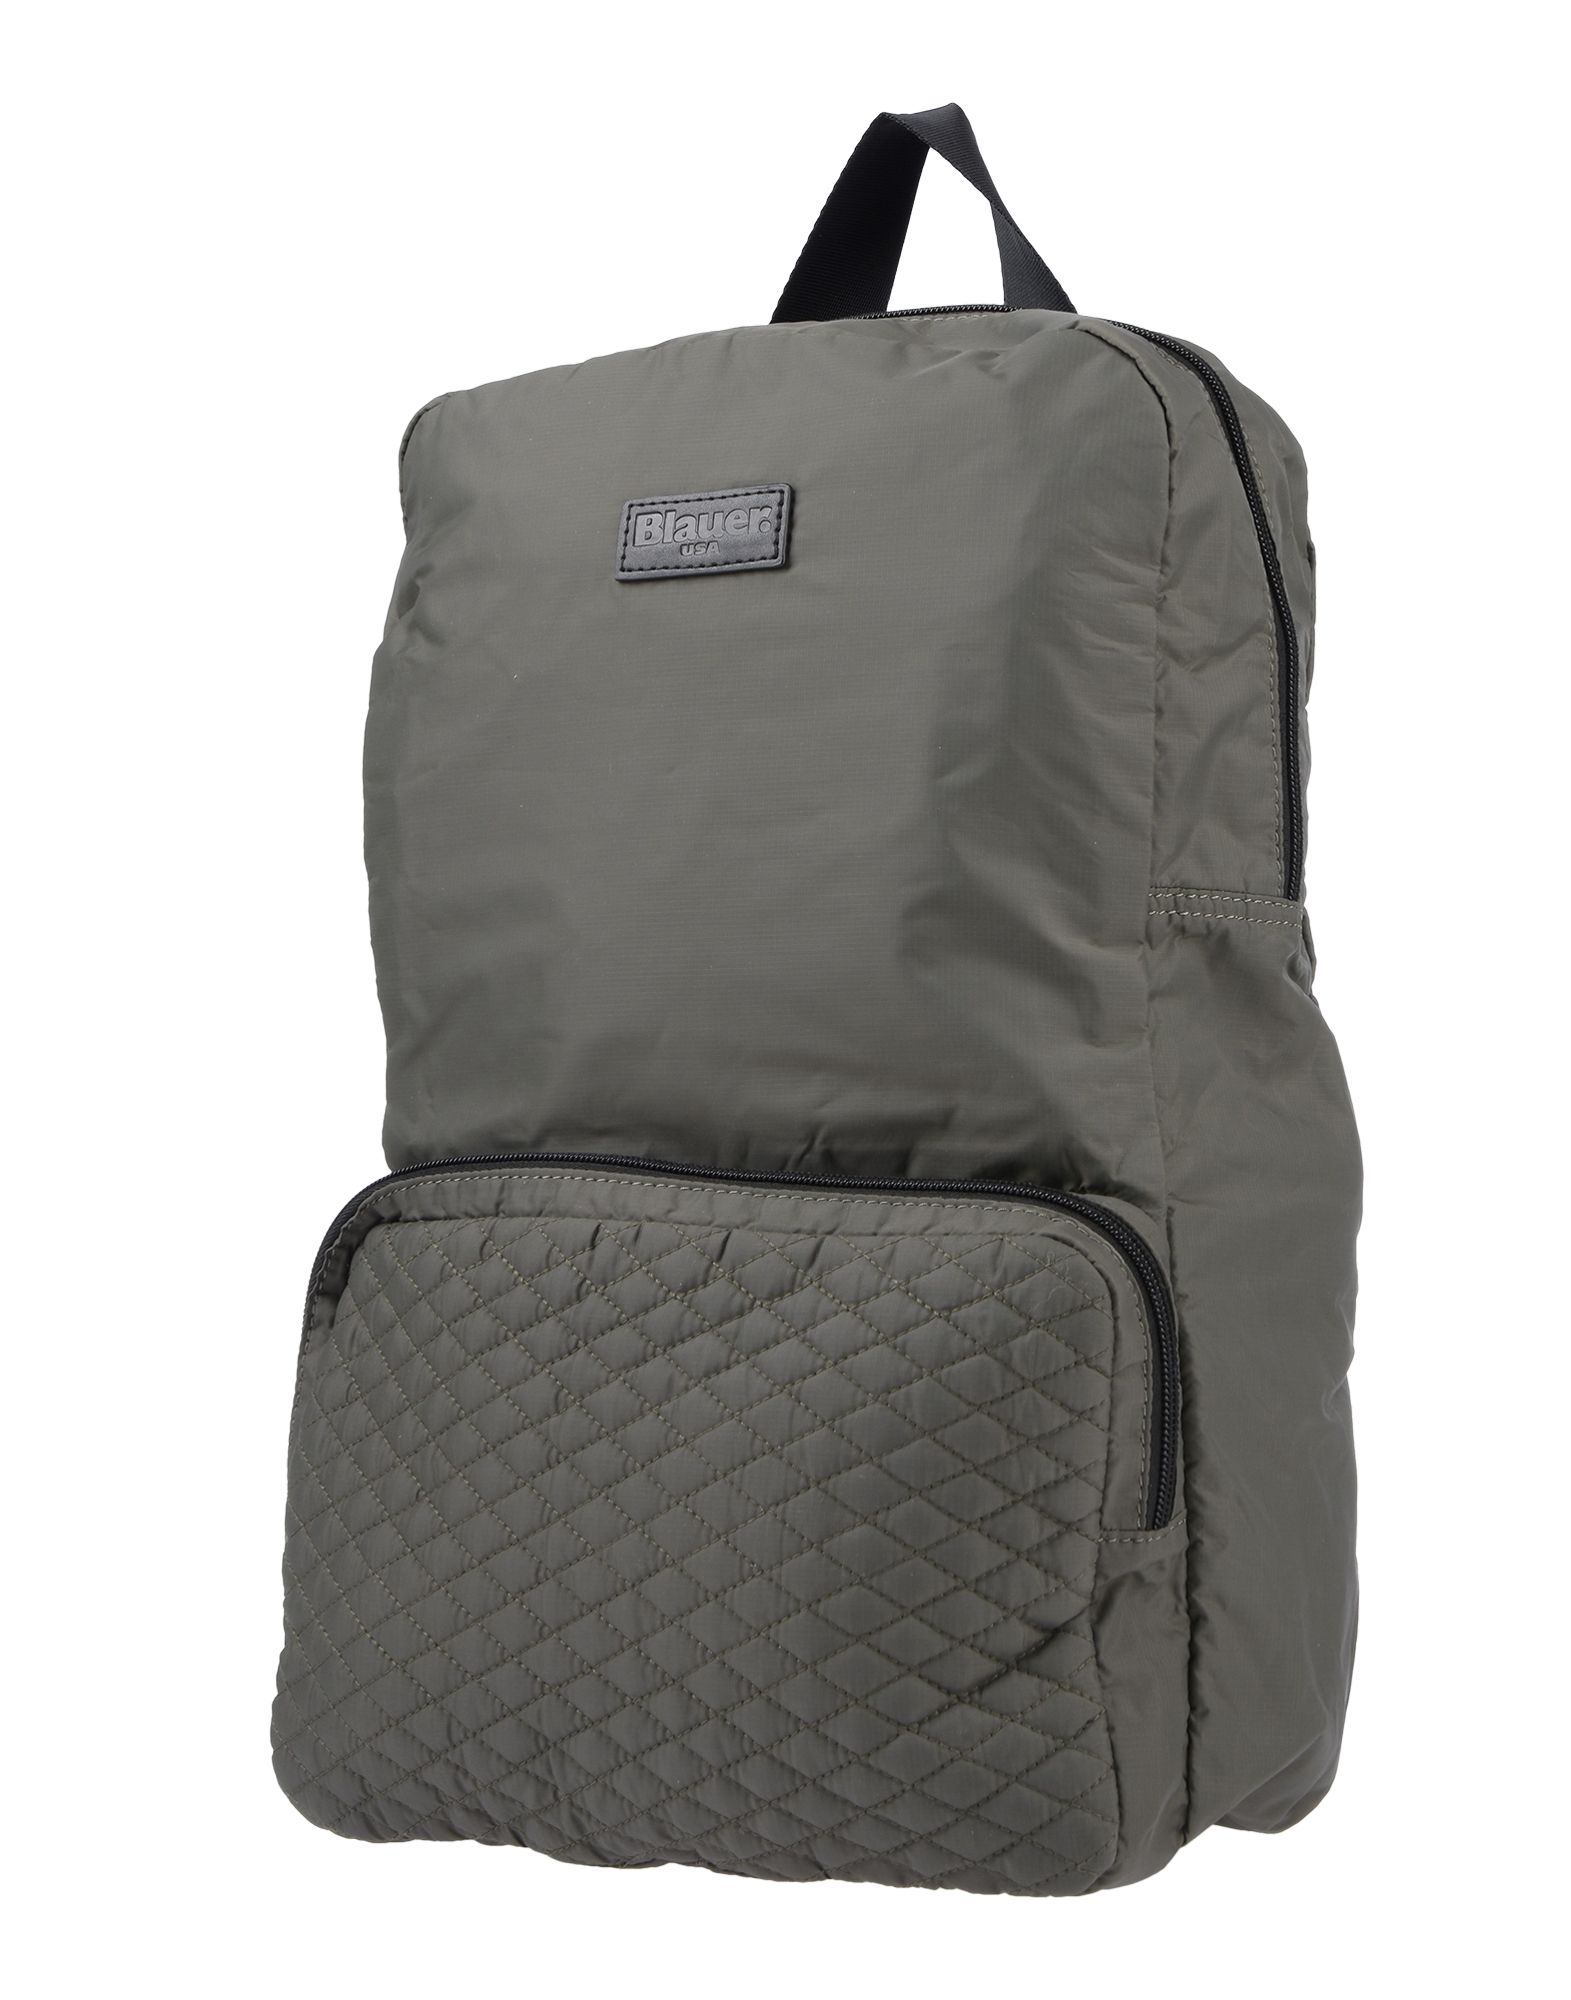 BLAUER Backpack & fanny pack,45457859NQ 1